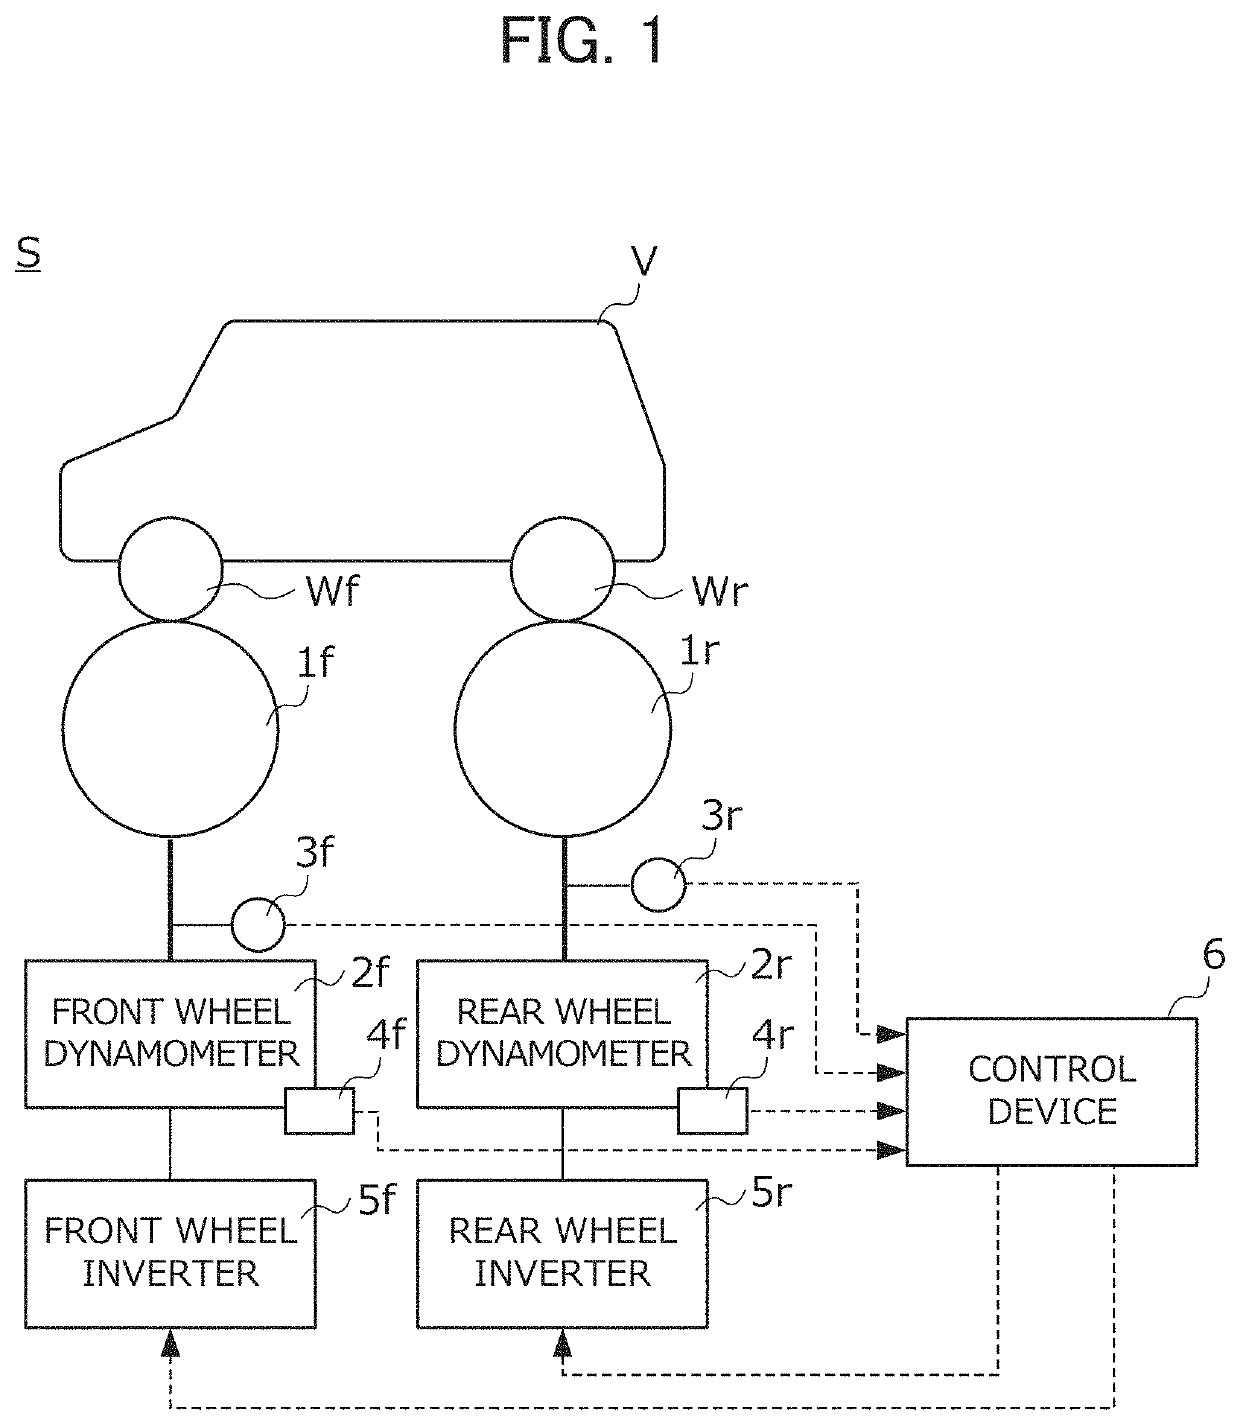 Control device of dynamometer system